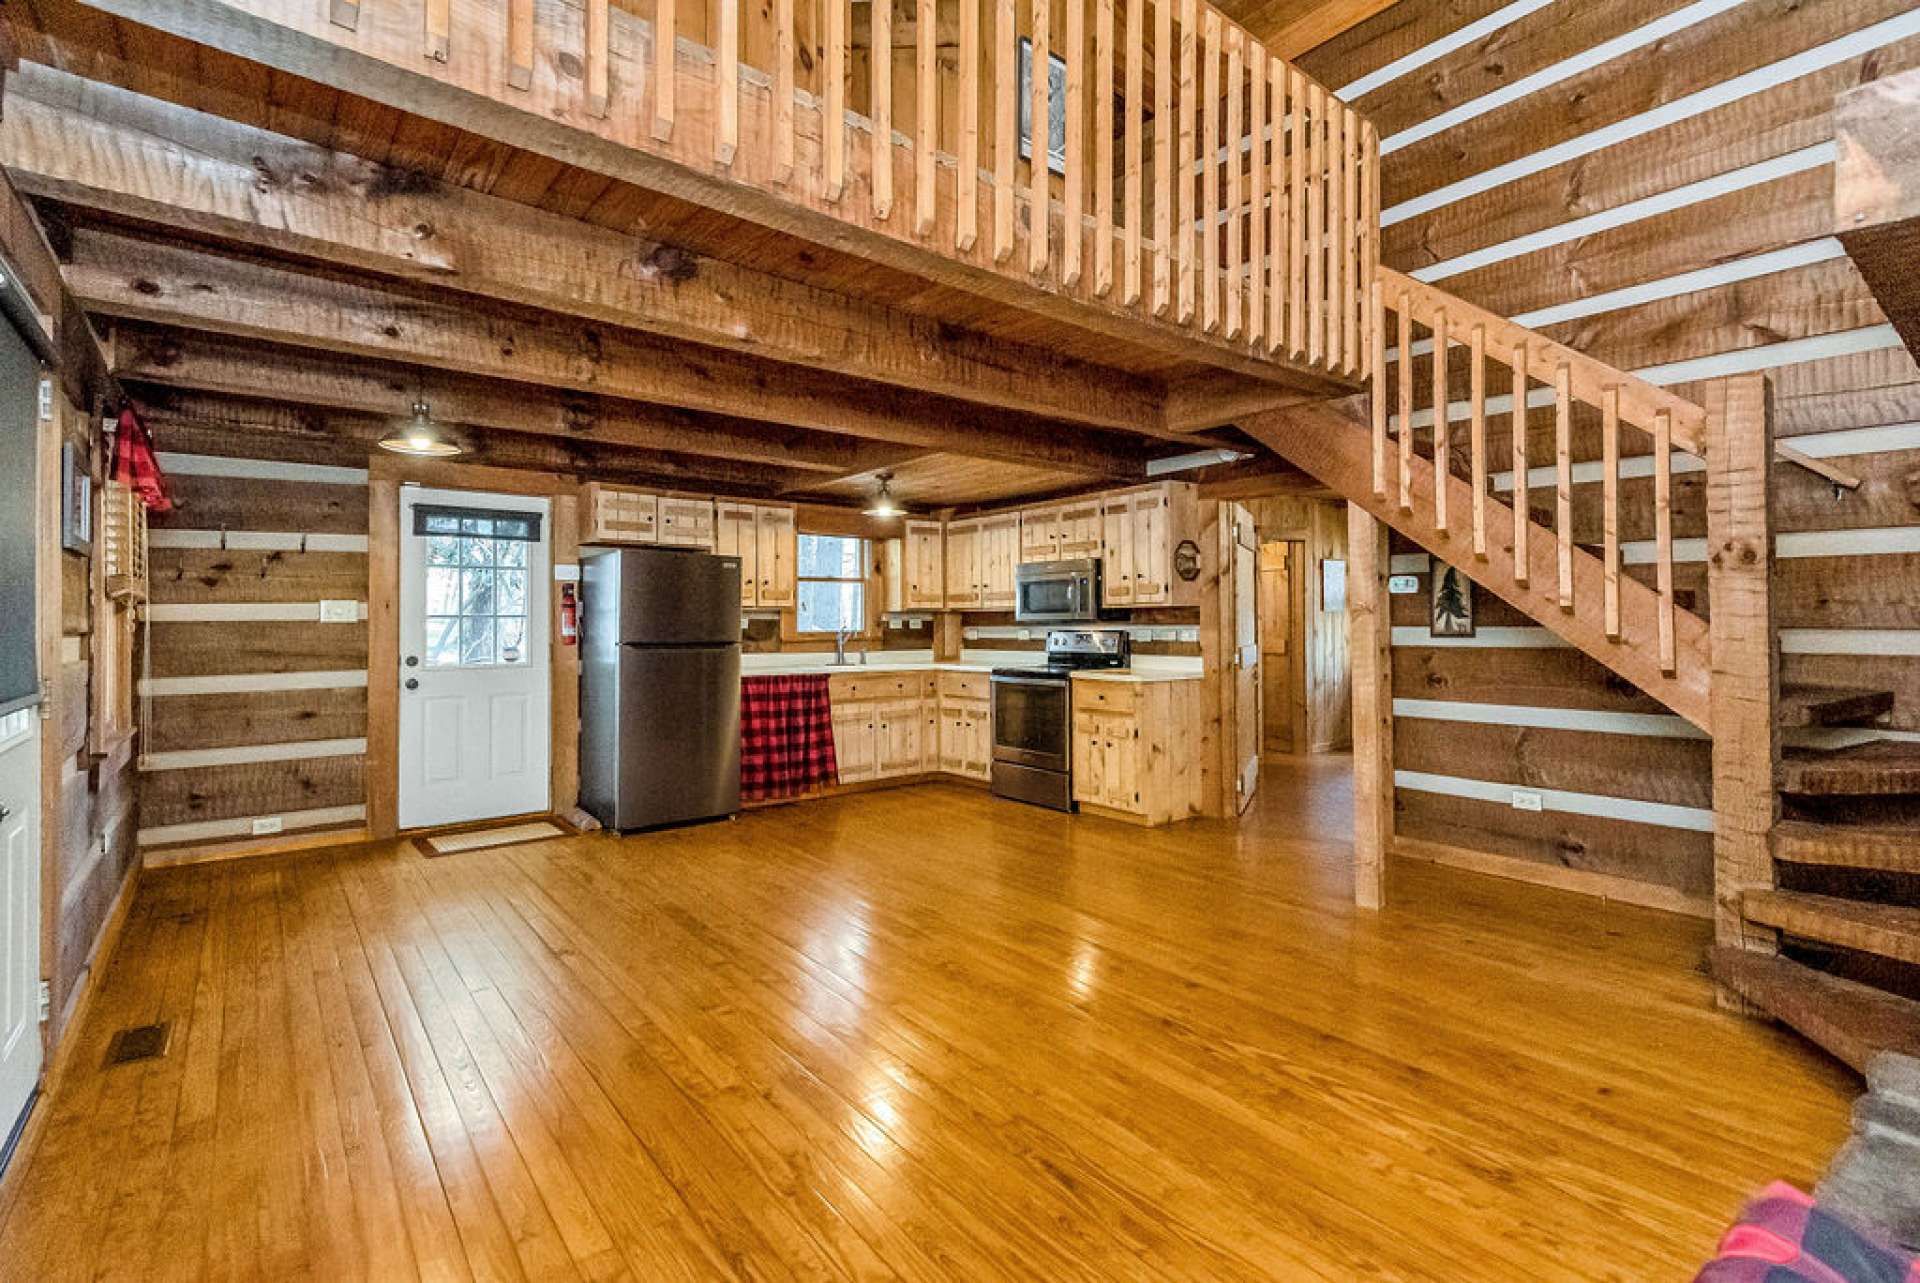 This home features wood floors throughout.